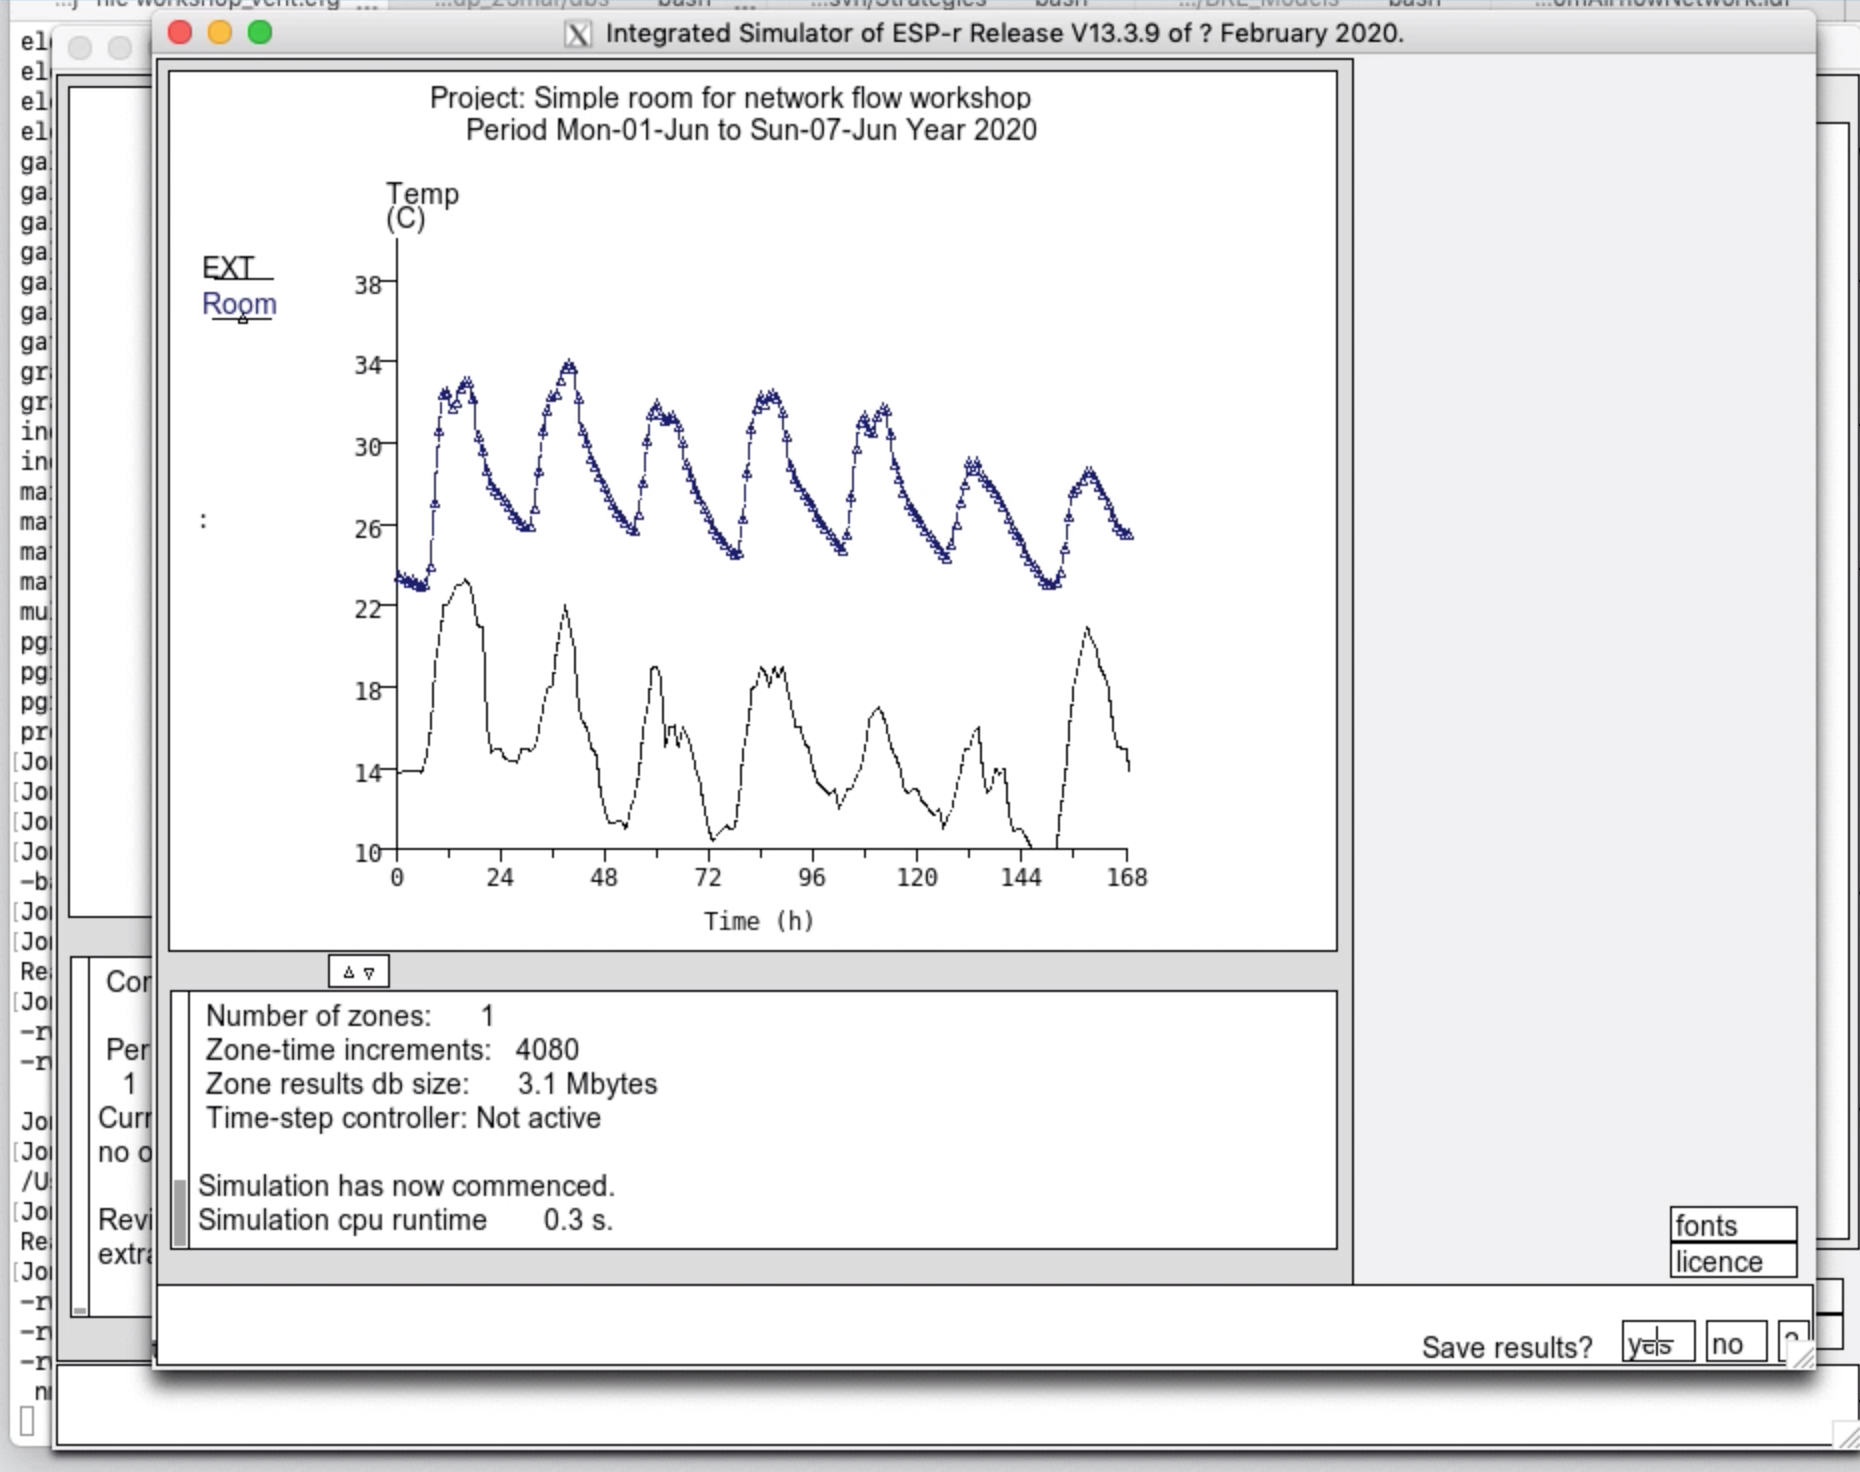 Figure 7.4.1: simulation preview of summer performance